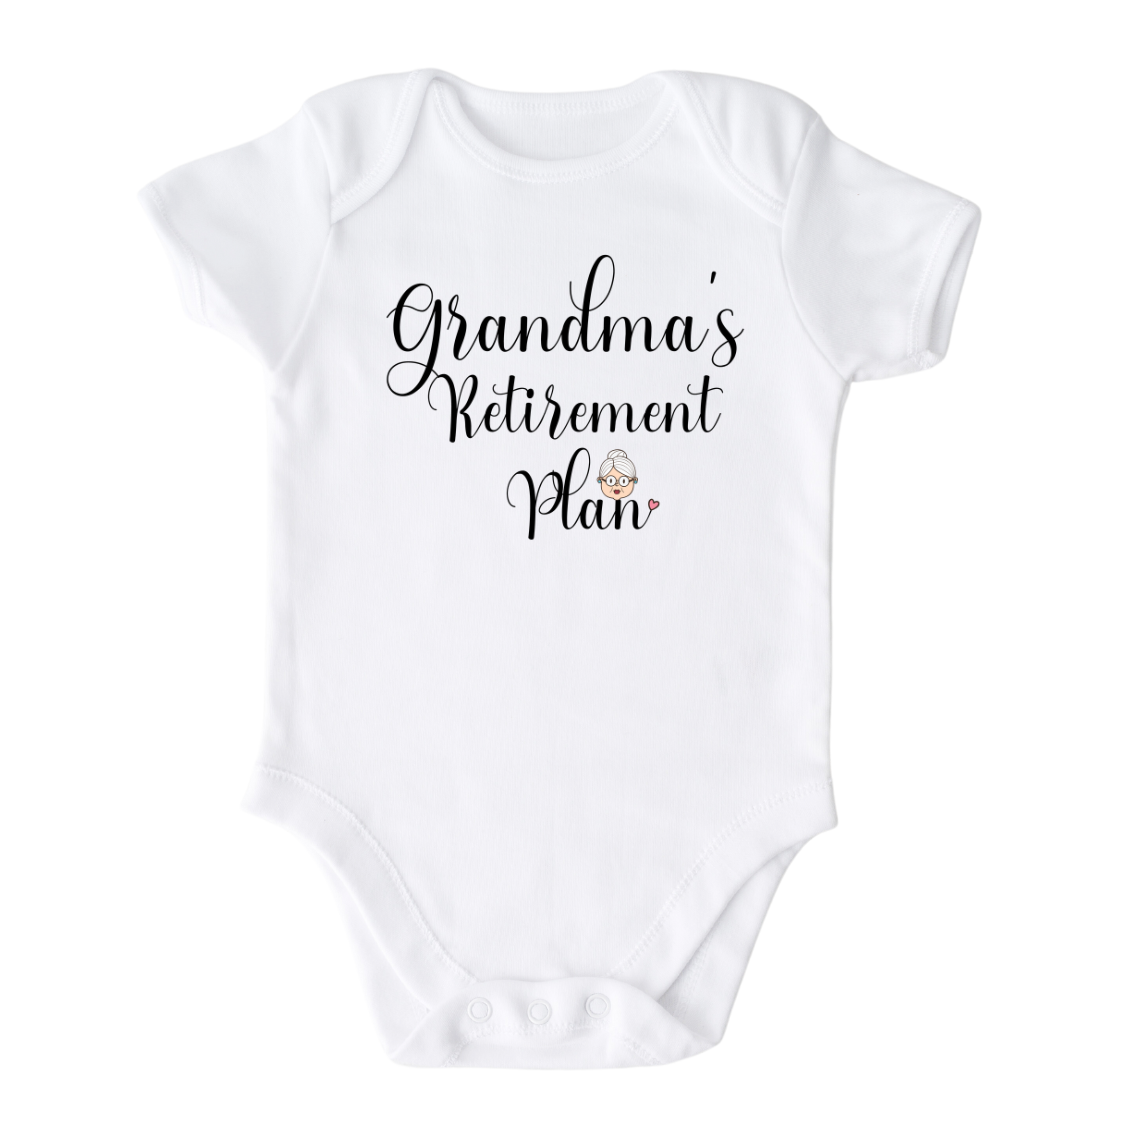 Baby Onesie - Grandma Baby Onsie A kid's t-shirt with a cute printed graphic that says 'Grandma's Retirement Plan.' The t-shirt features an adorable design and is made with high-quality materials for comfort and longevity. 